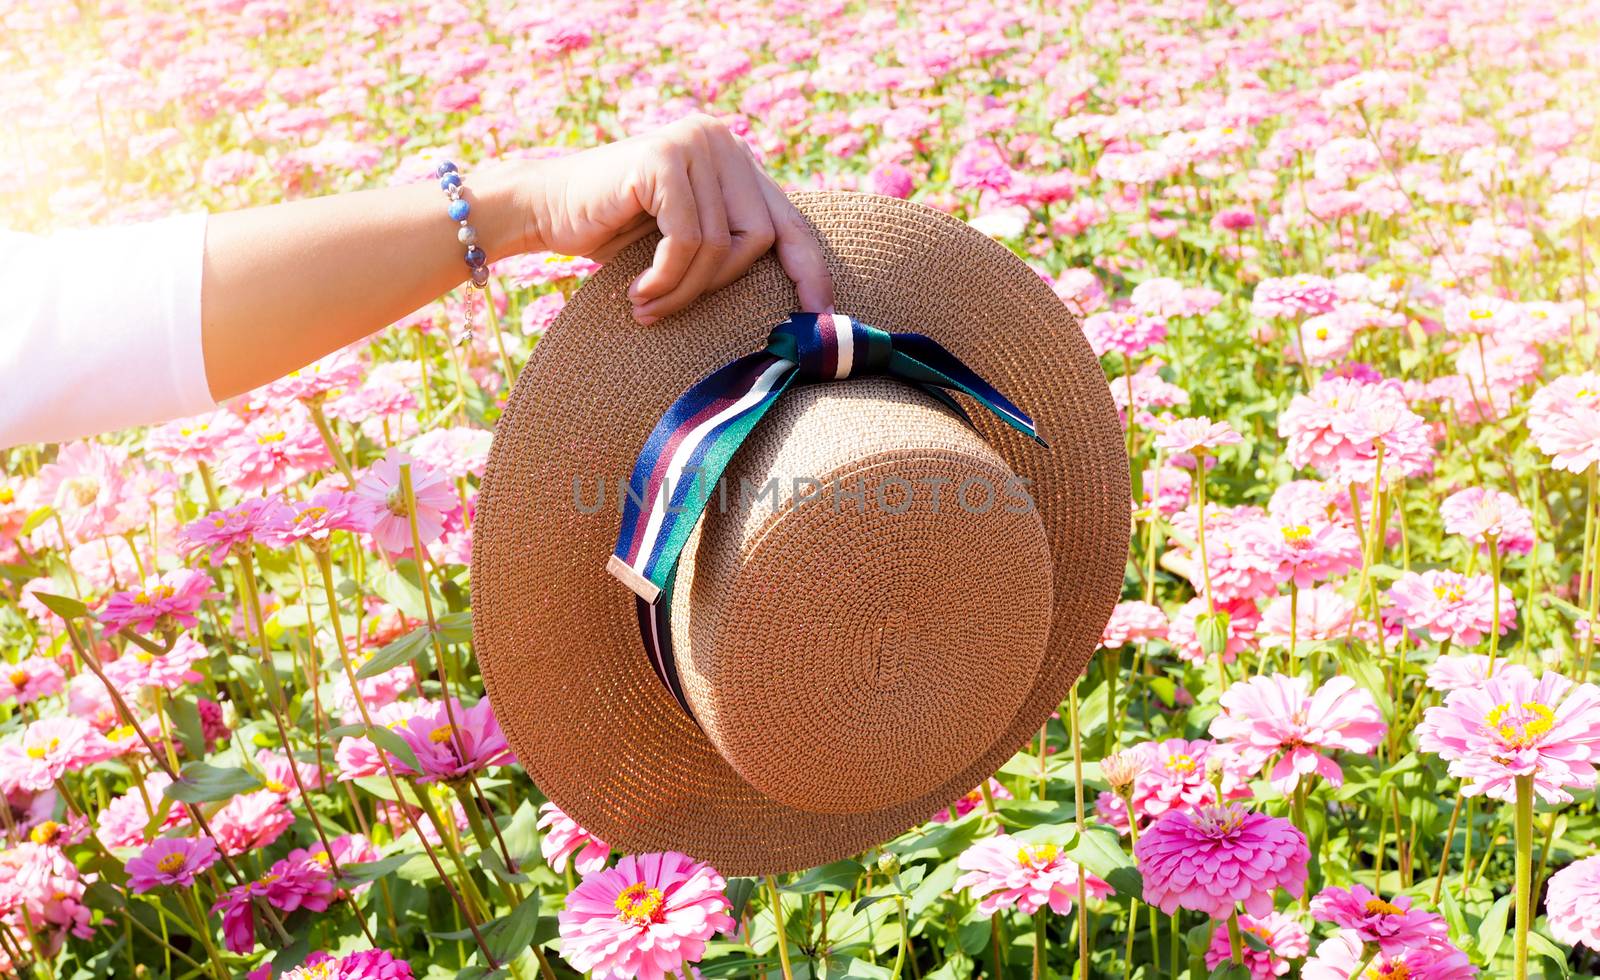 hand with straw hat vintage fashion style in Zinnia flower field by kittima05